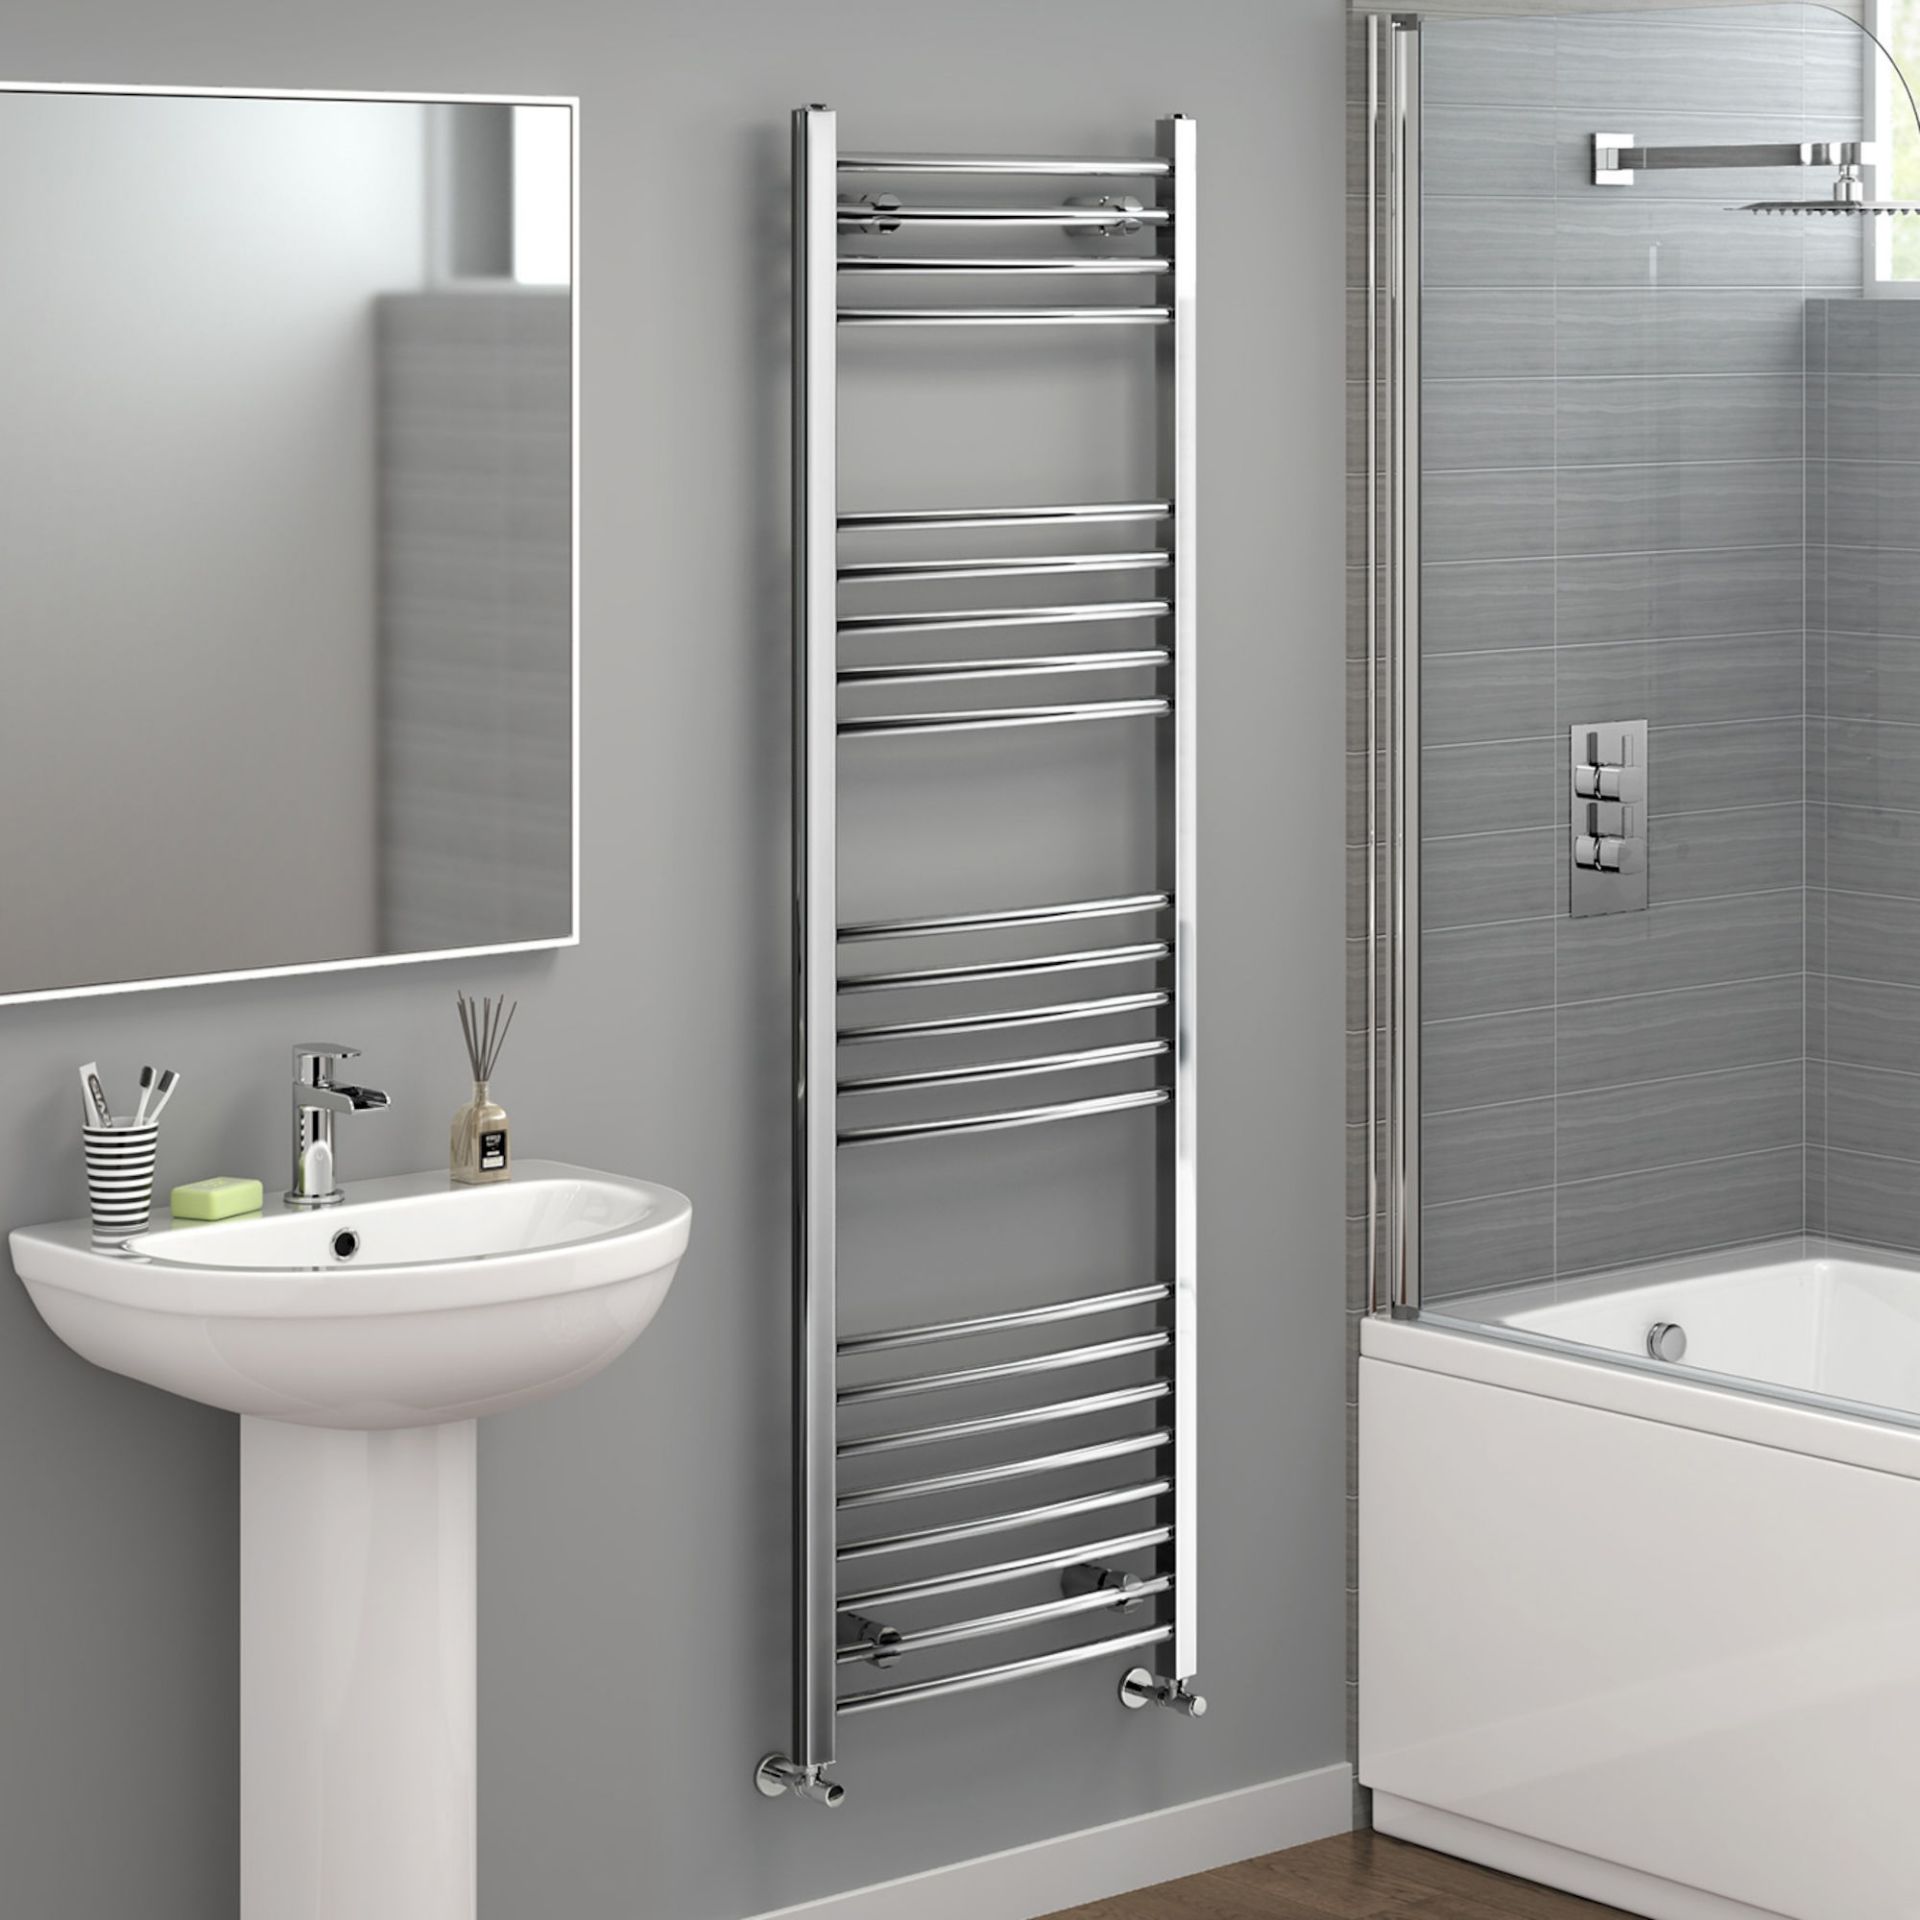 (AA50) 1600x600mm - 20mm Tubes - Chrome Curved Rail Ladder Towel Radiator. RRP £316.99. Our ...